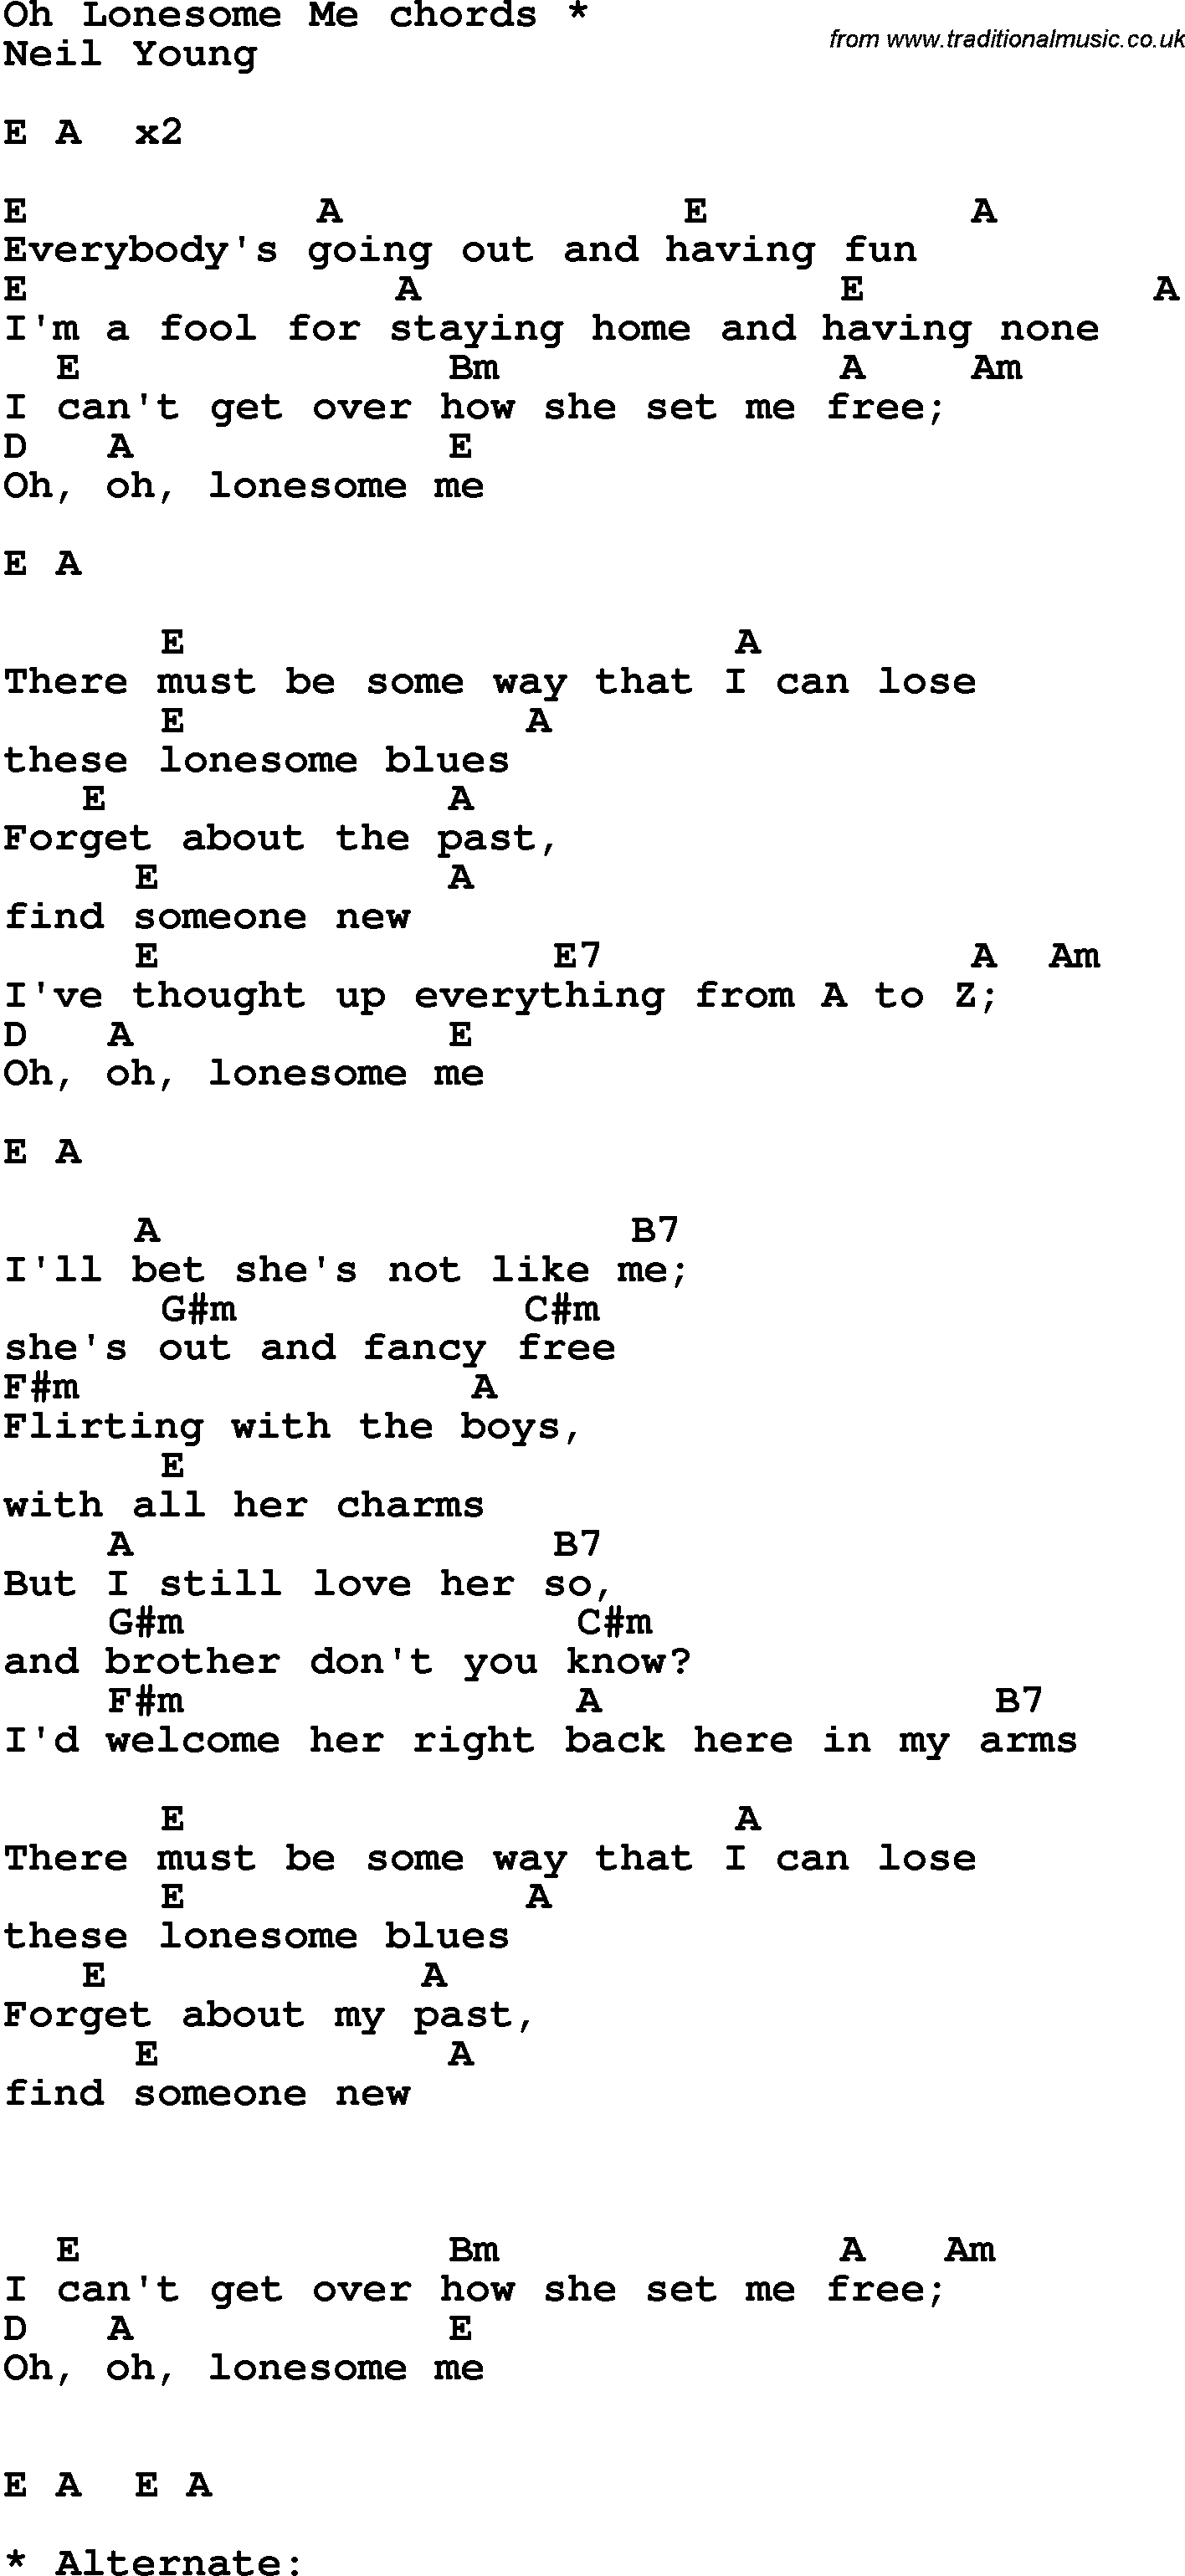 Song Lyrics with guitar chords for Oh Lonesome Me